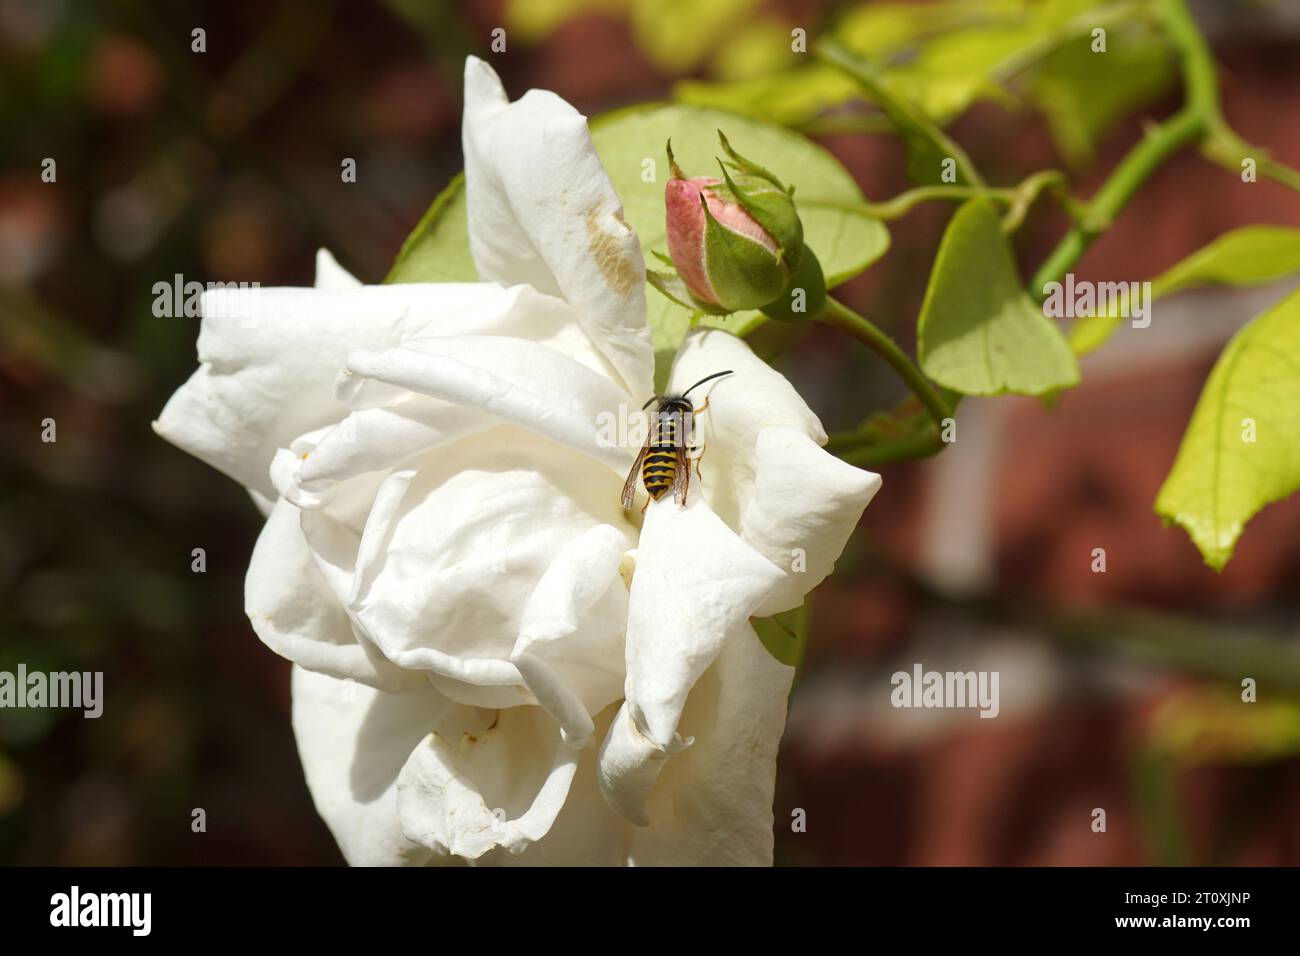 Close up of a common wasp (Vespula vulgaris), family Vespidae on a white pink flower of a climbing rose (Rosa New Dawn) in autumn. Dutch garden, Oct. Stock Photo